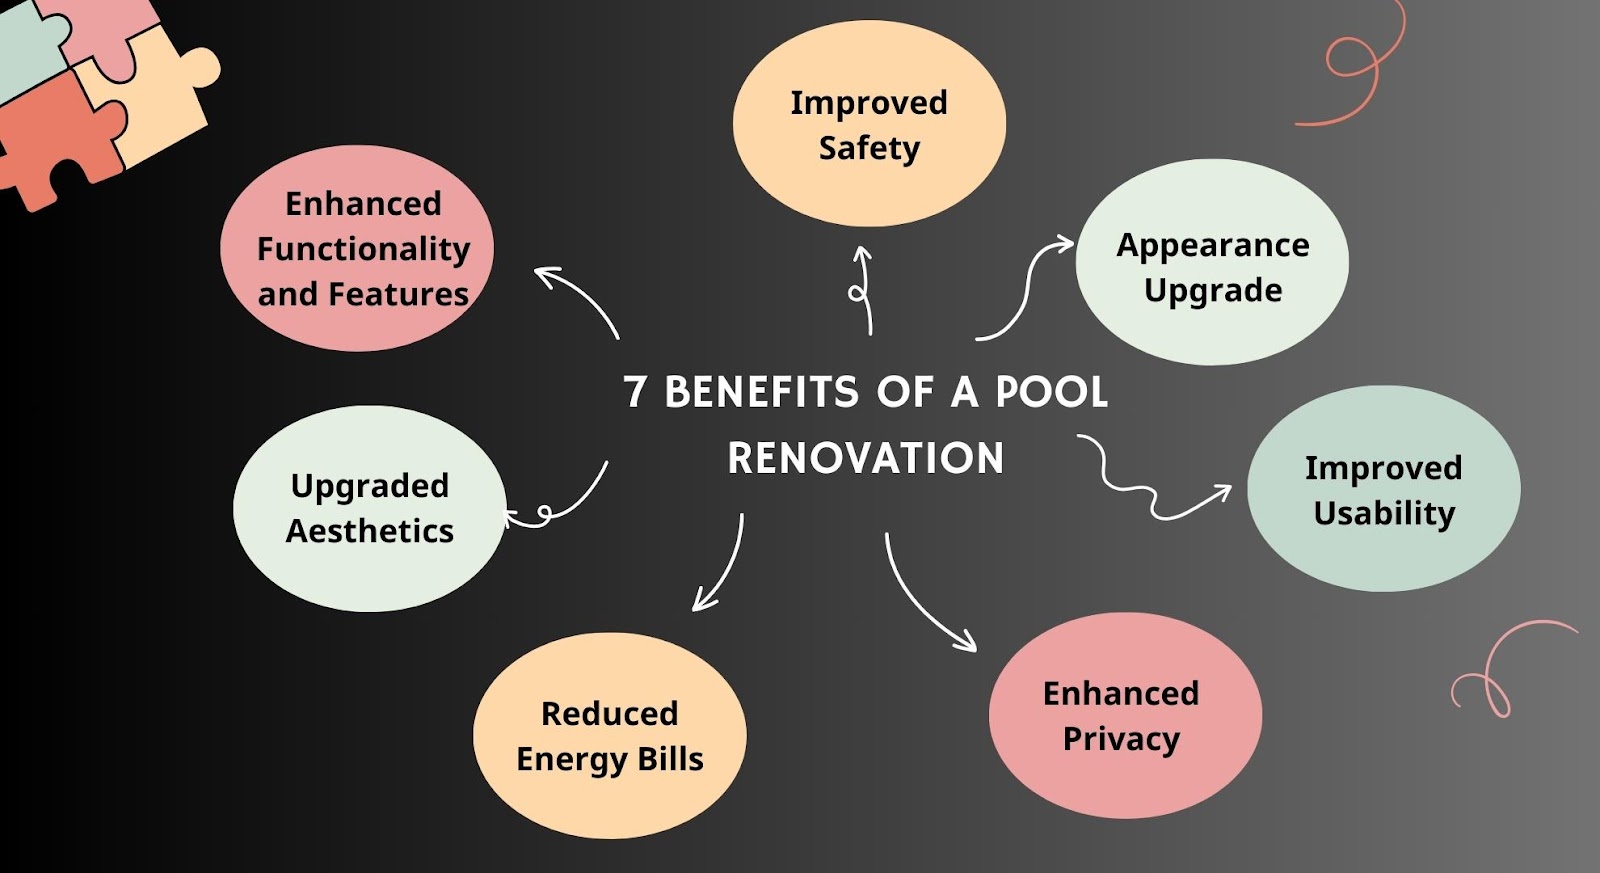 The Benefits of a Pool Renovation